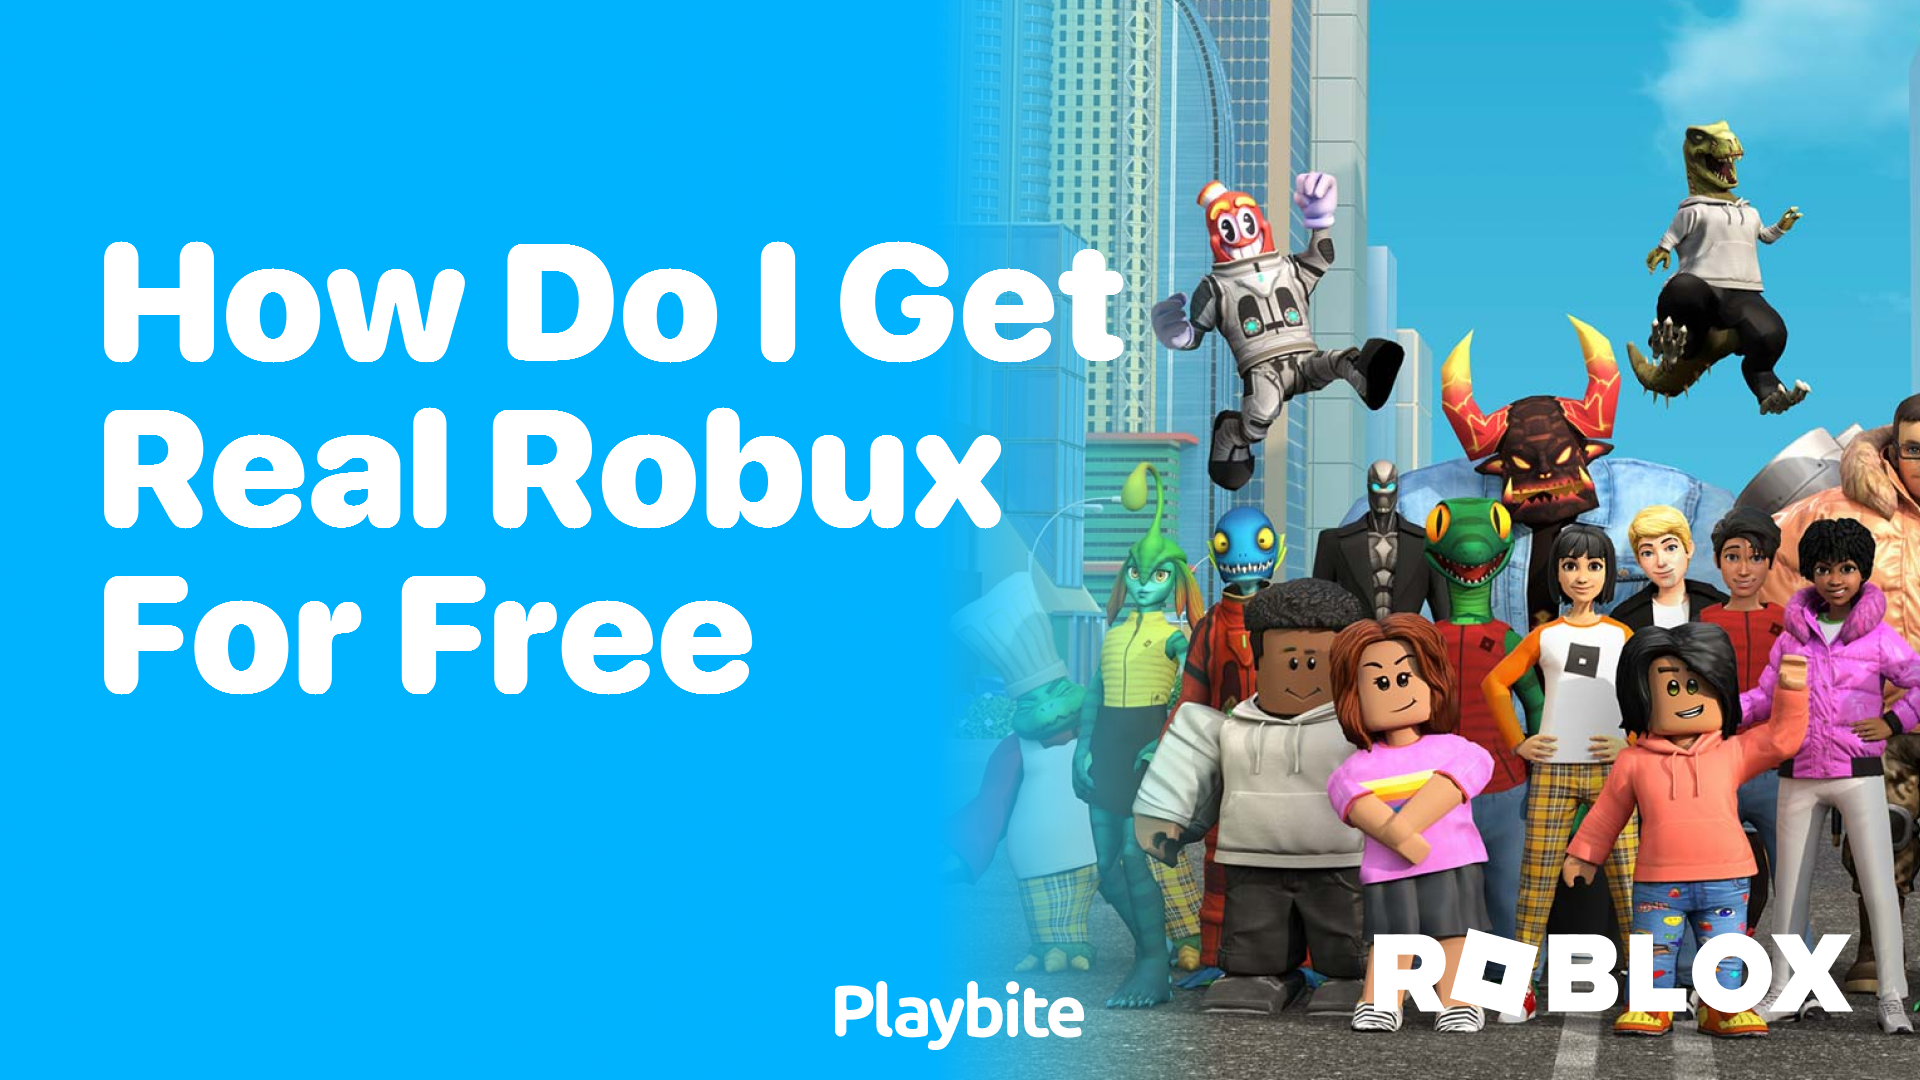 How Do I Get Real Robux for Free?